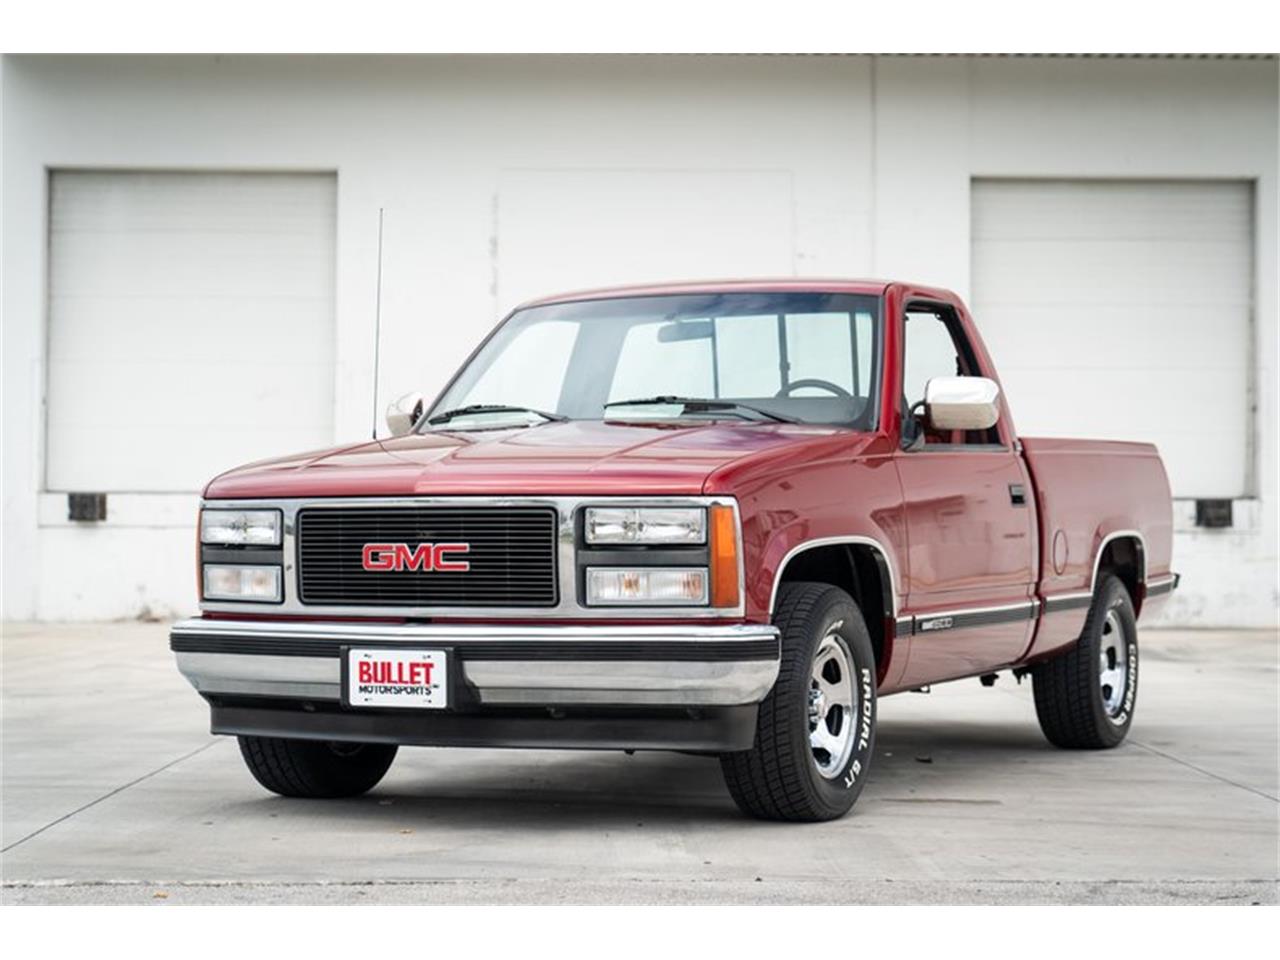 For Sale: 1991 GMC 1500 in Fort Lauderdale, Florida for sale in Fort Lauderdale, FL